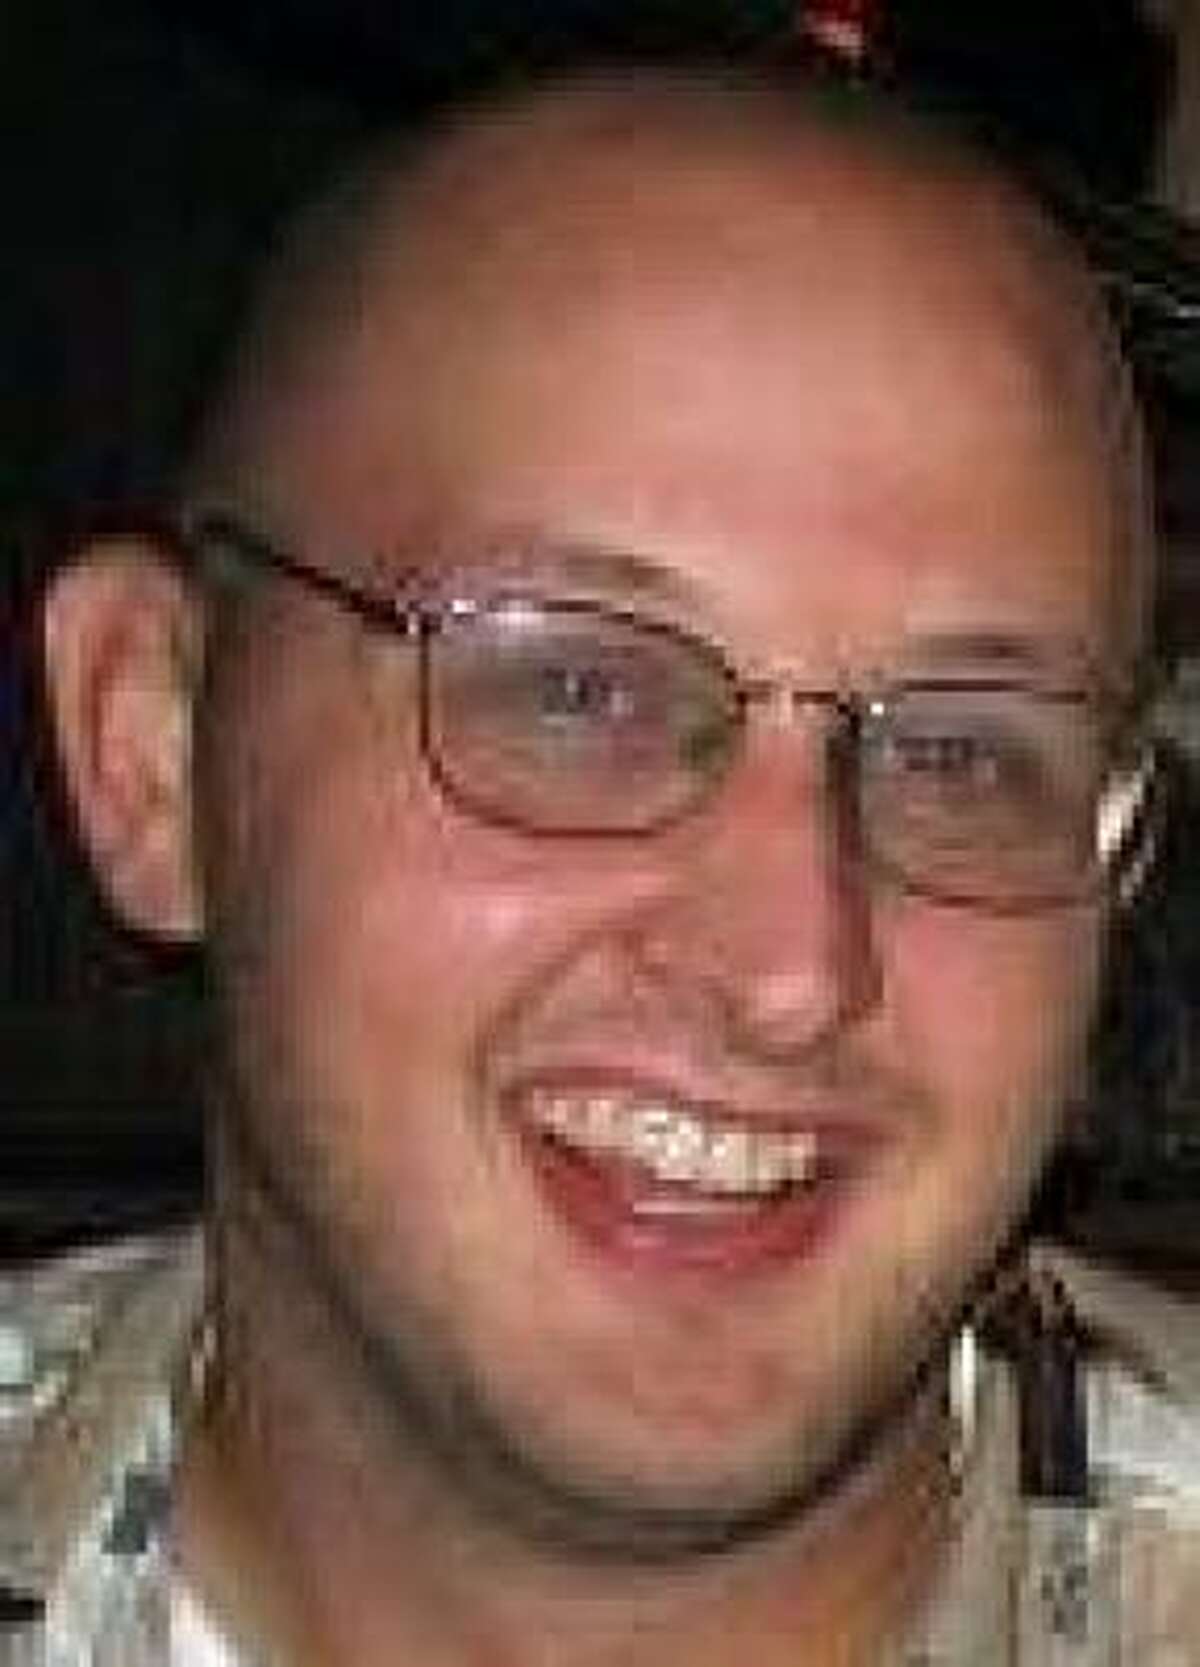 Services are pending for U.S. Army Spc. David P. McCormick, 26, of Bay City, killed in Iraq.